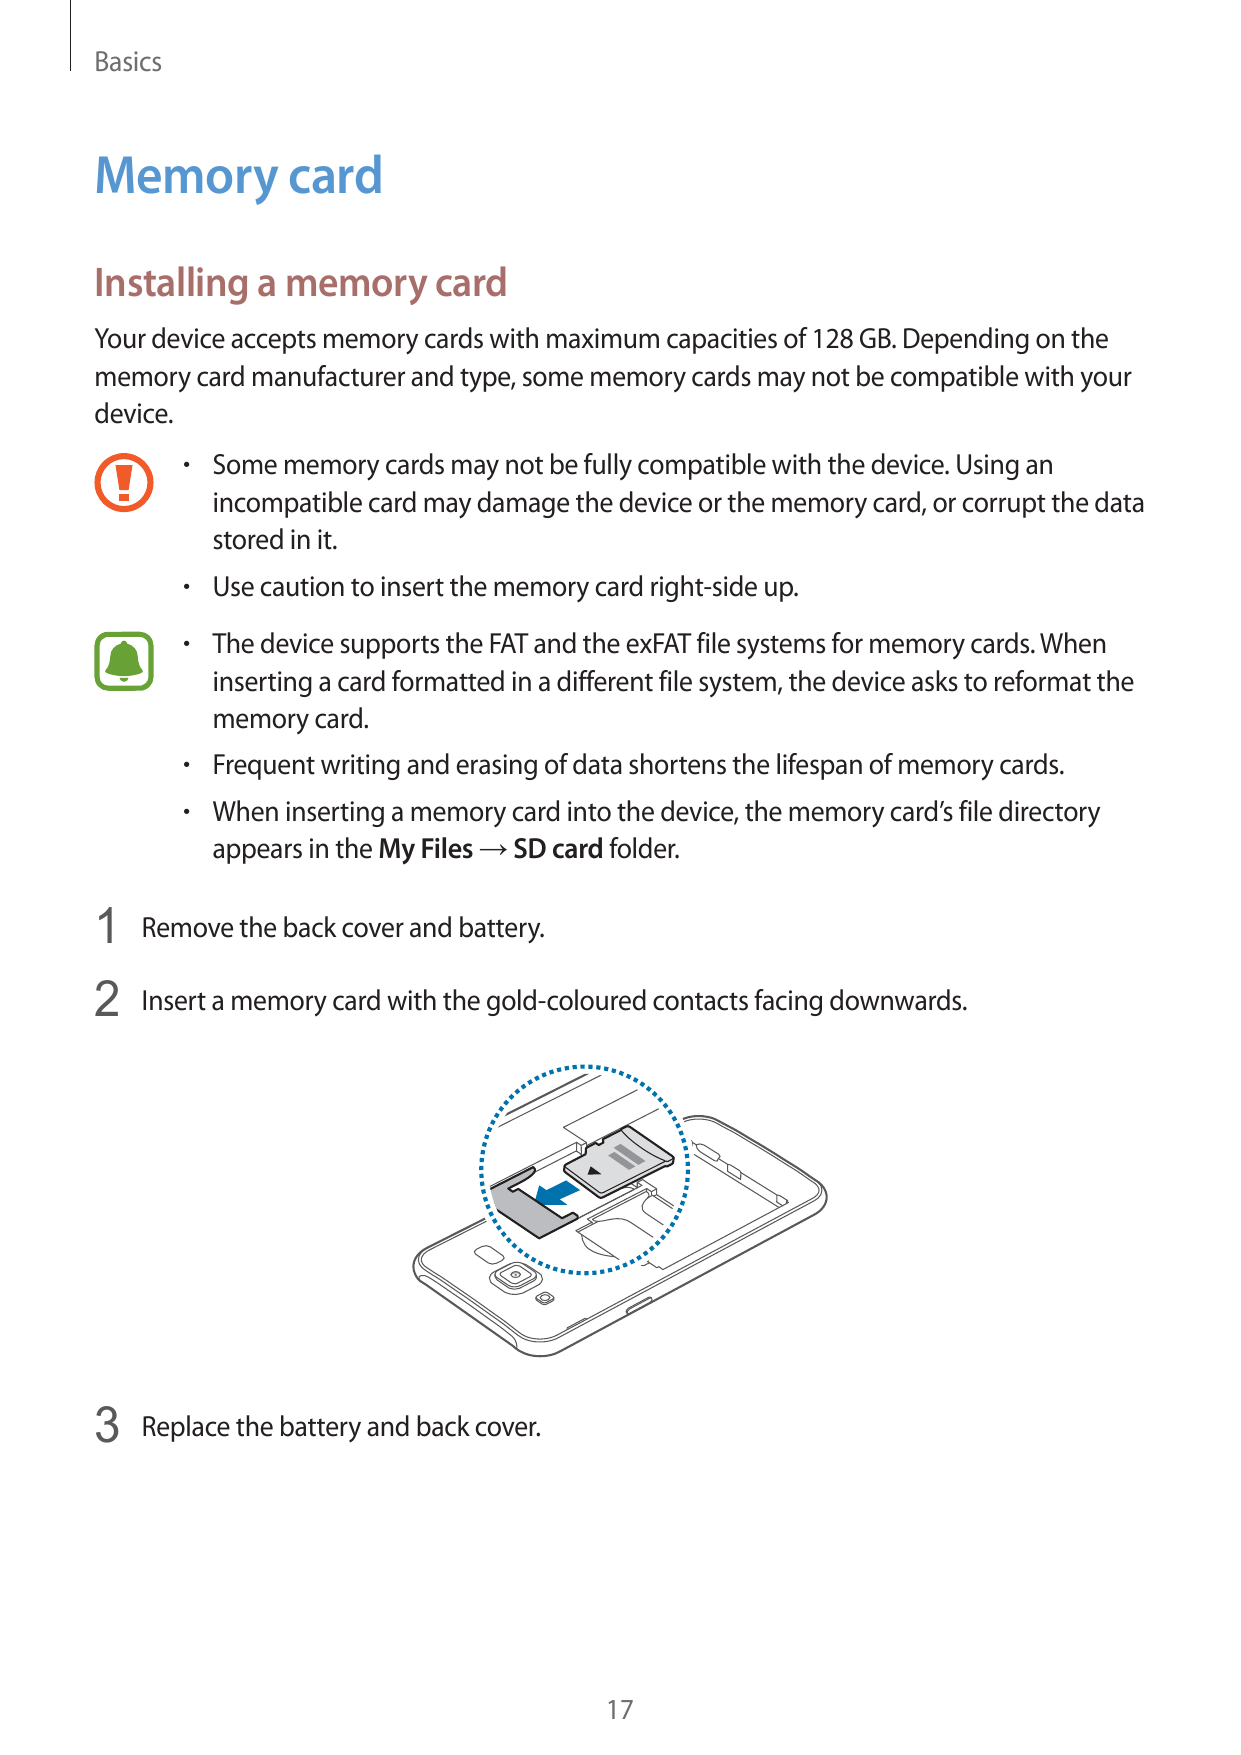 BasicsMemory cardInstalling a memory cardYour device accepts memory cards with maximum capacities of 128 GB. Depending on themem